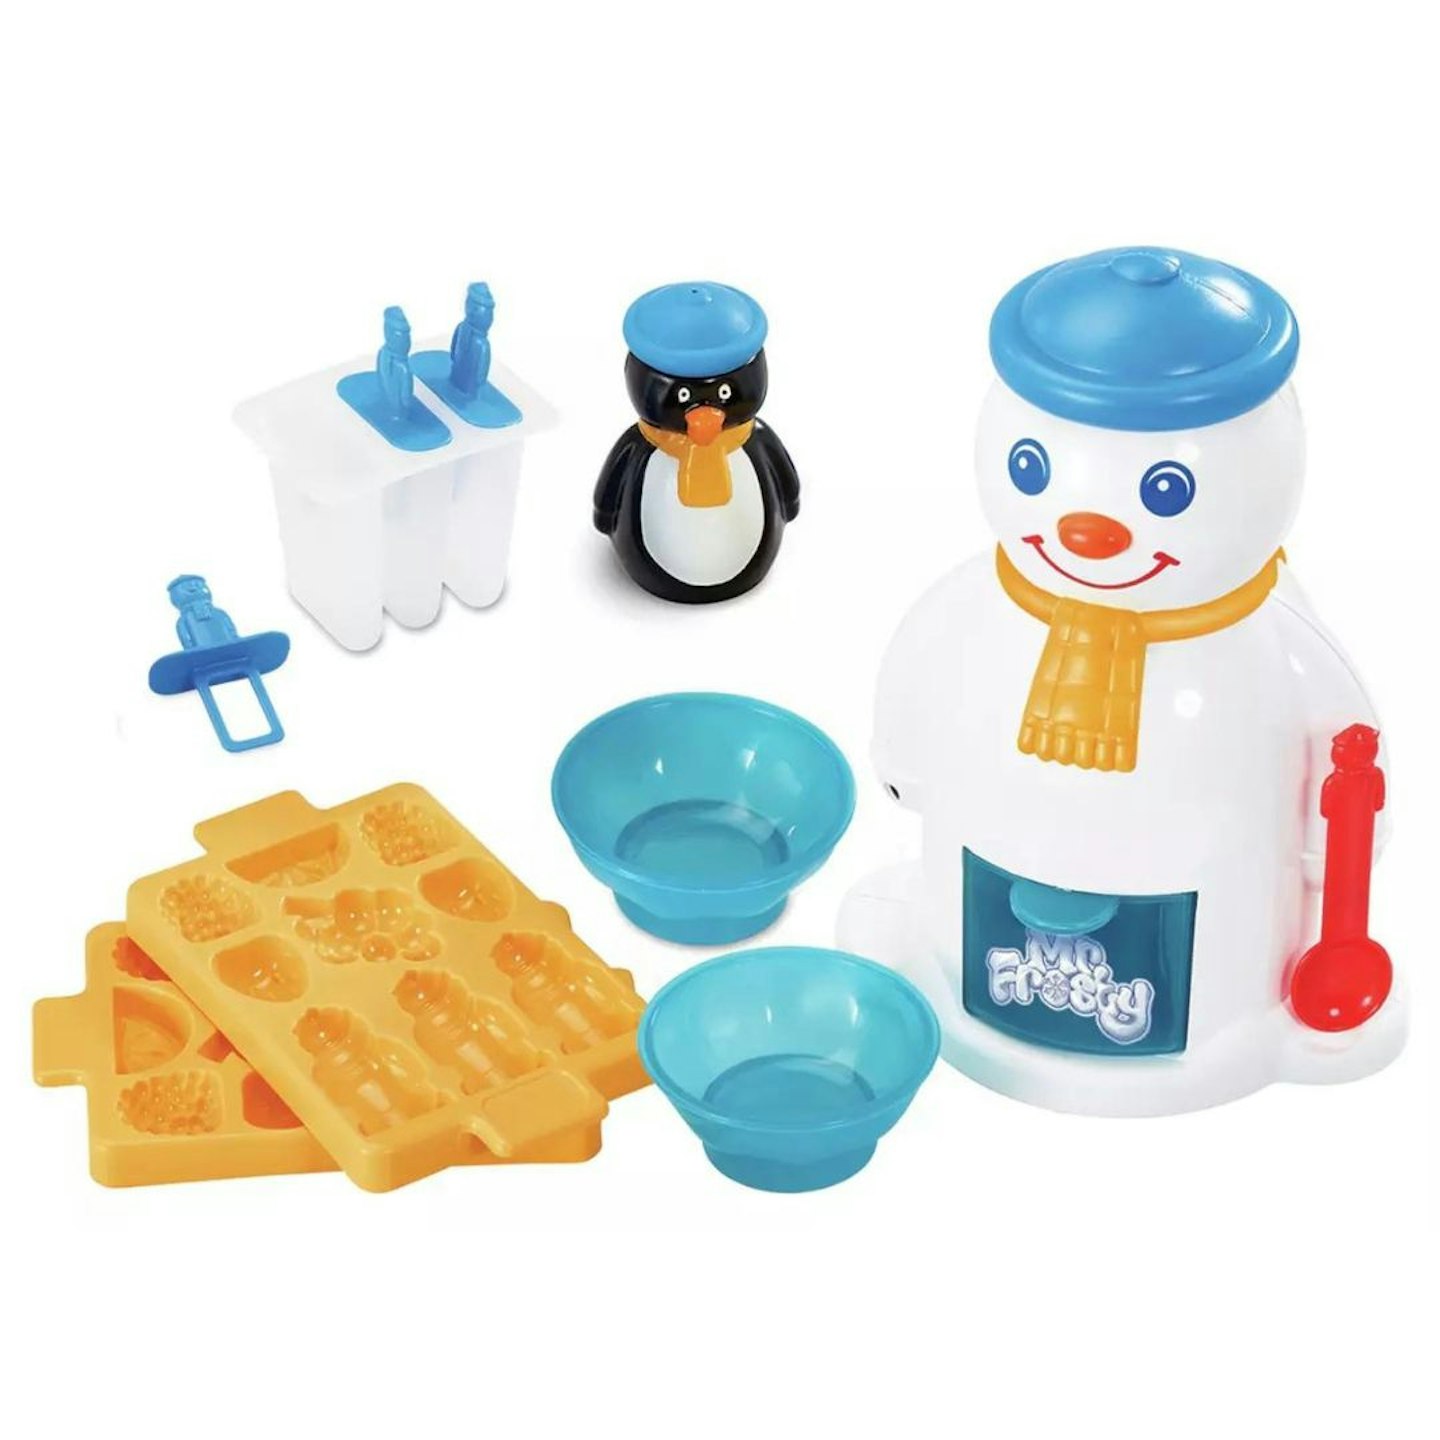 Best Retro Toys:  Cool Create Mr Frosty The Ice Crunchy Maker